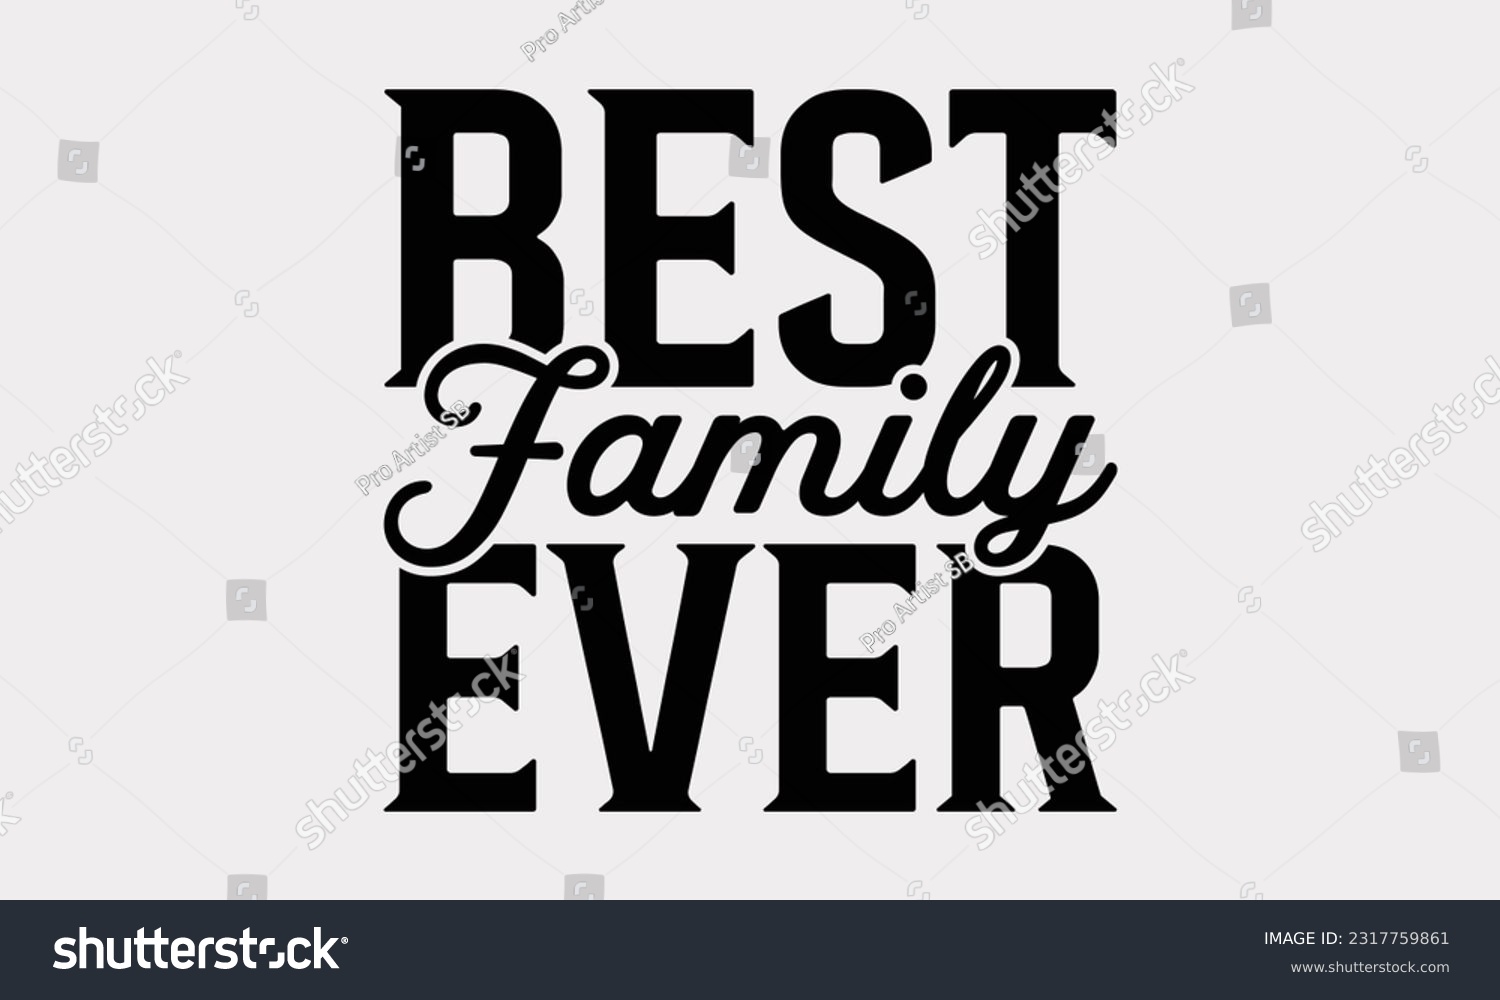 SVG of Best Family Ever - Family SVG Design, Hand Lettering Phrase Isolated On White Background, Modern Calligraphy Vector, SVG File For Cutting. svg